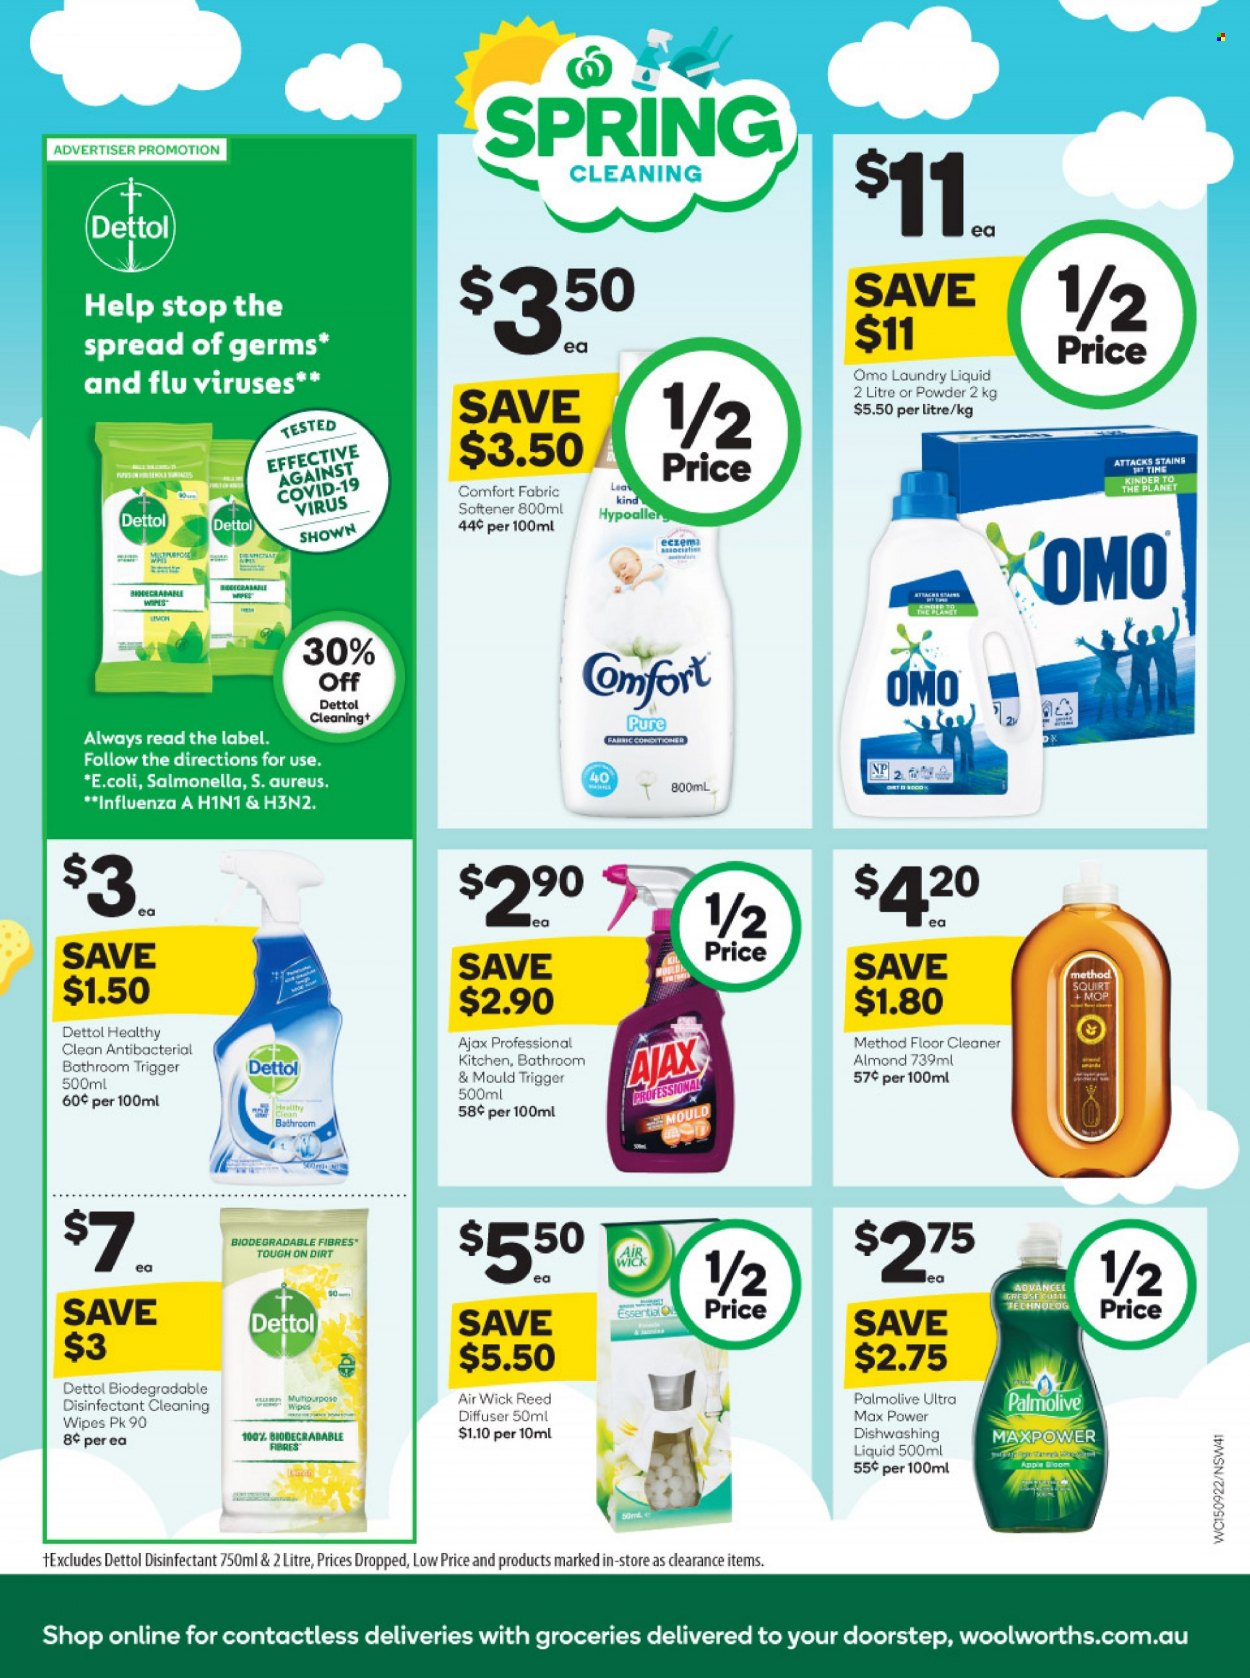 thumbnail - Woolworths Catalogue - 15 Sep 2021 - 21 Sep 2021 - Sales products - cleansing wipes, wipes, Dettol, cleaner, desinfection, floor cleaner, Ajax, fabric softener, Omo, laundry detergent, Comfort softener, dishwashing liquid, Palmolive, conditioner, mop, diffuser, Air Wick. Page 41.